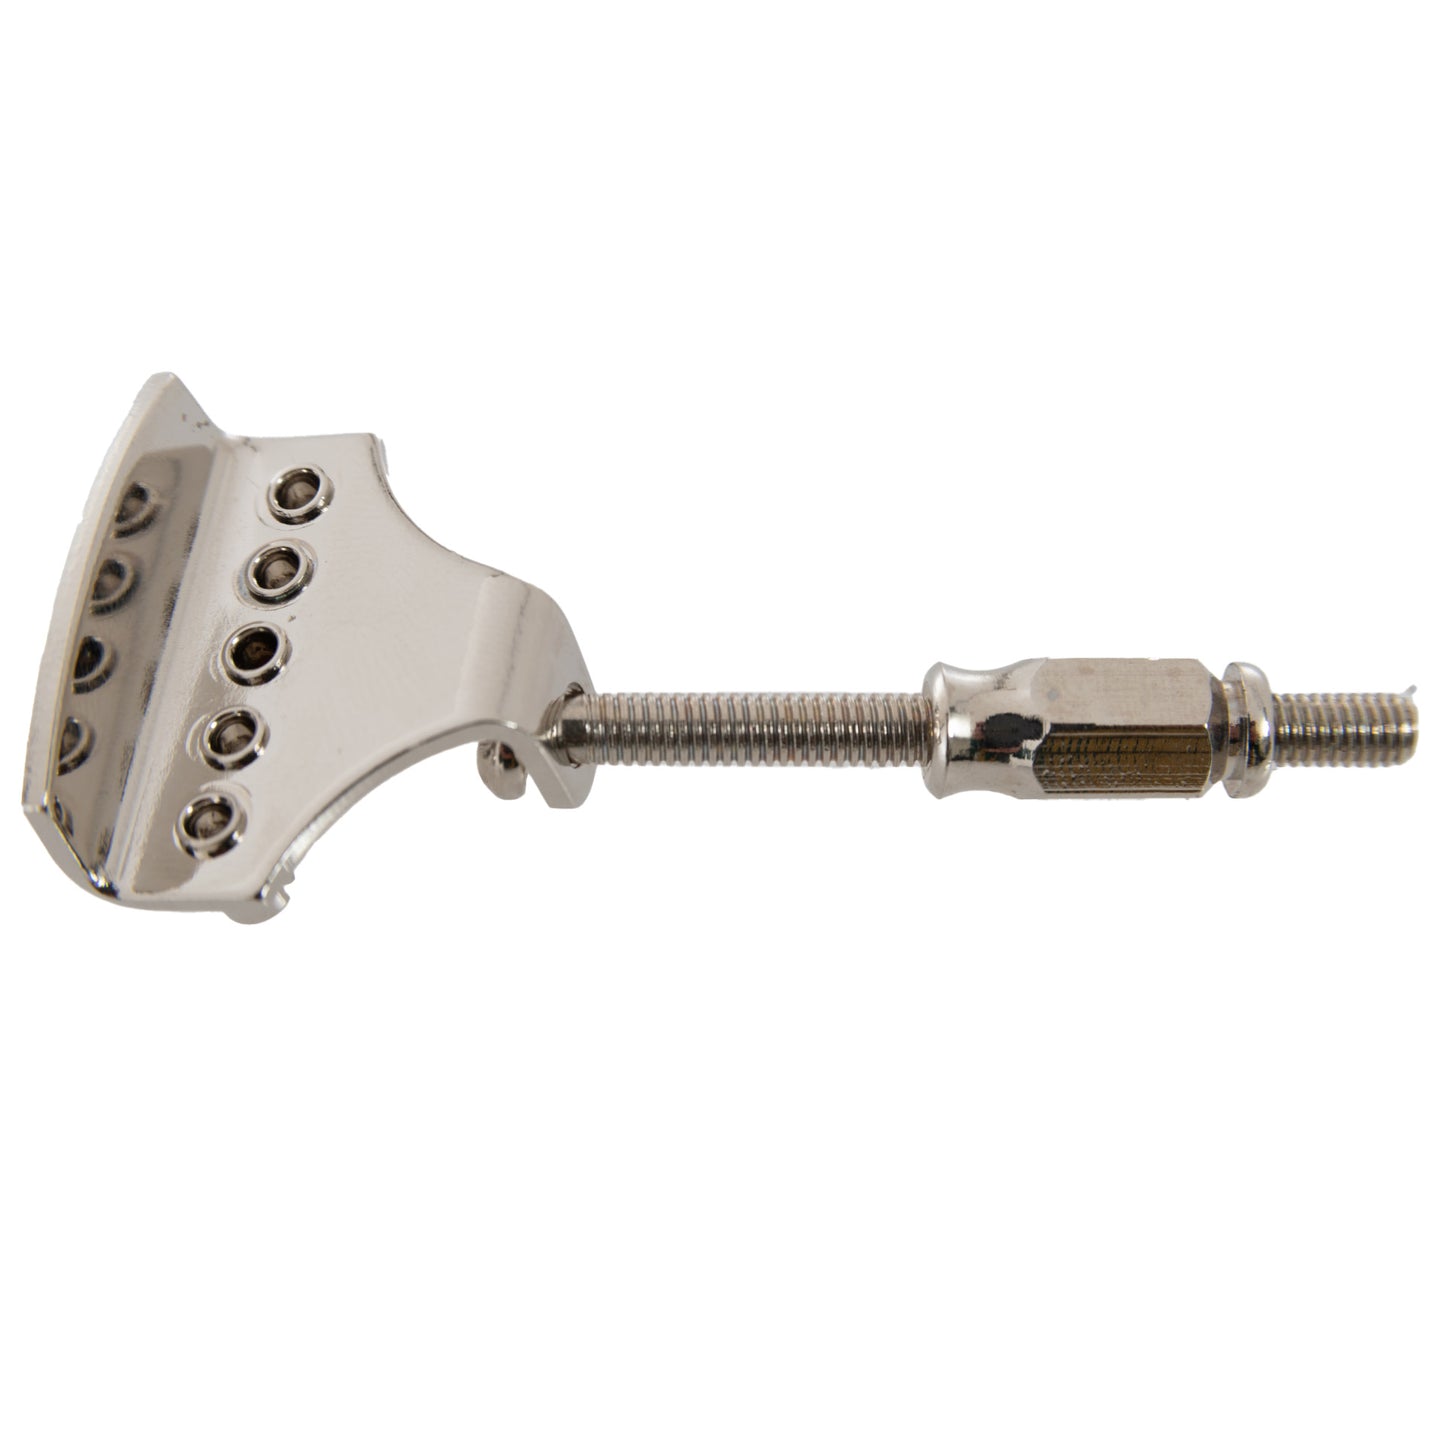 Bottom of Nickel Plated No Knot Tailpiece